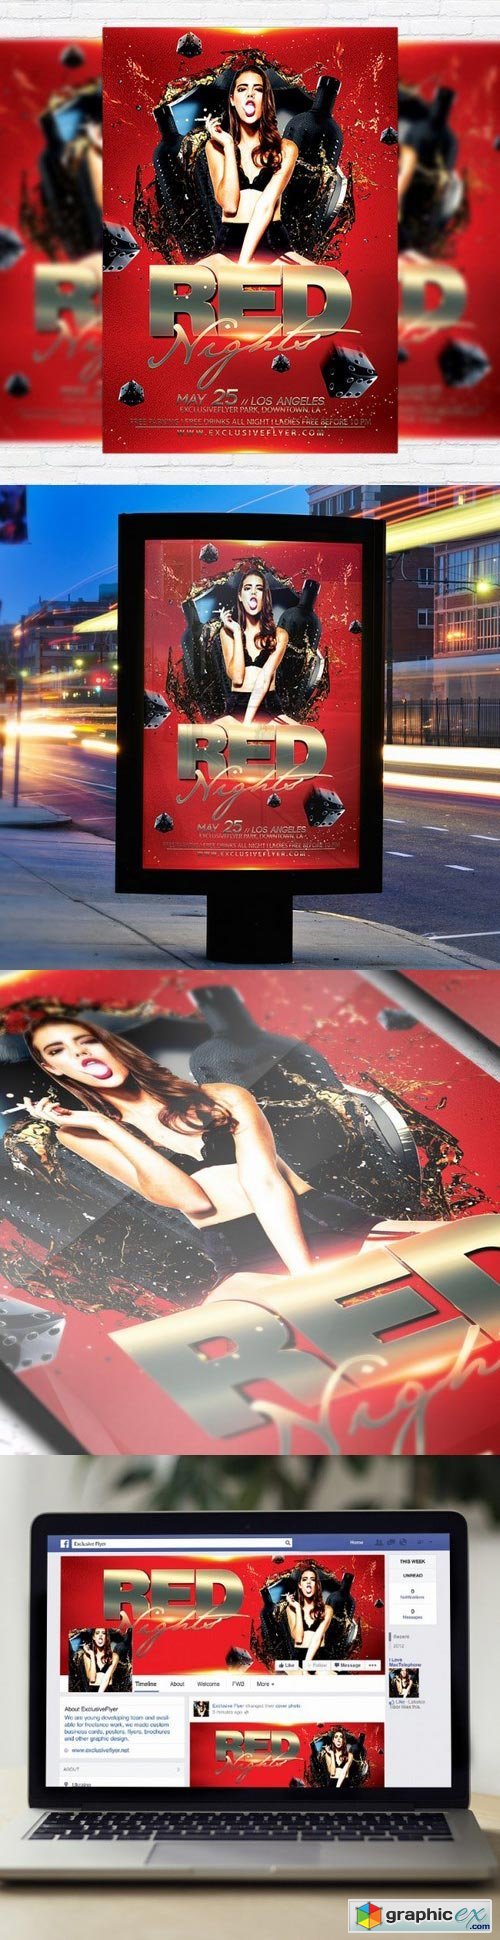 Red Night Flyer PSD Template + Facebook Cover